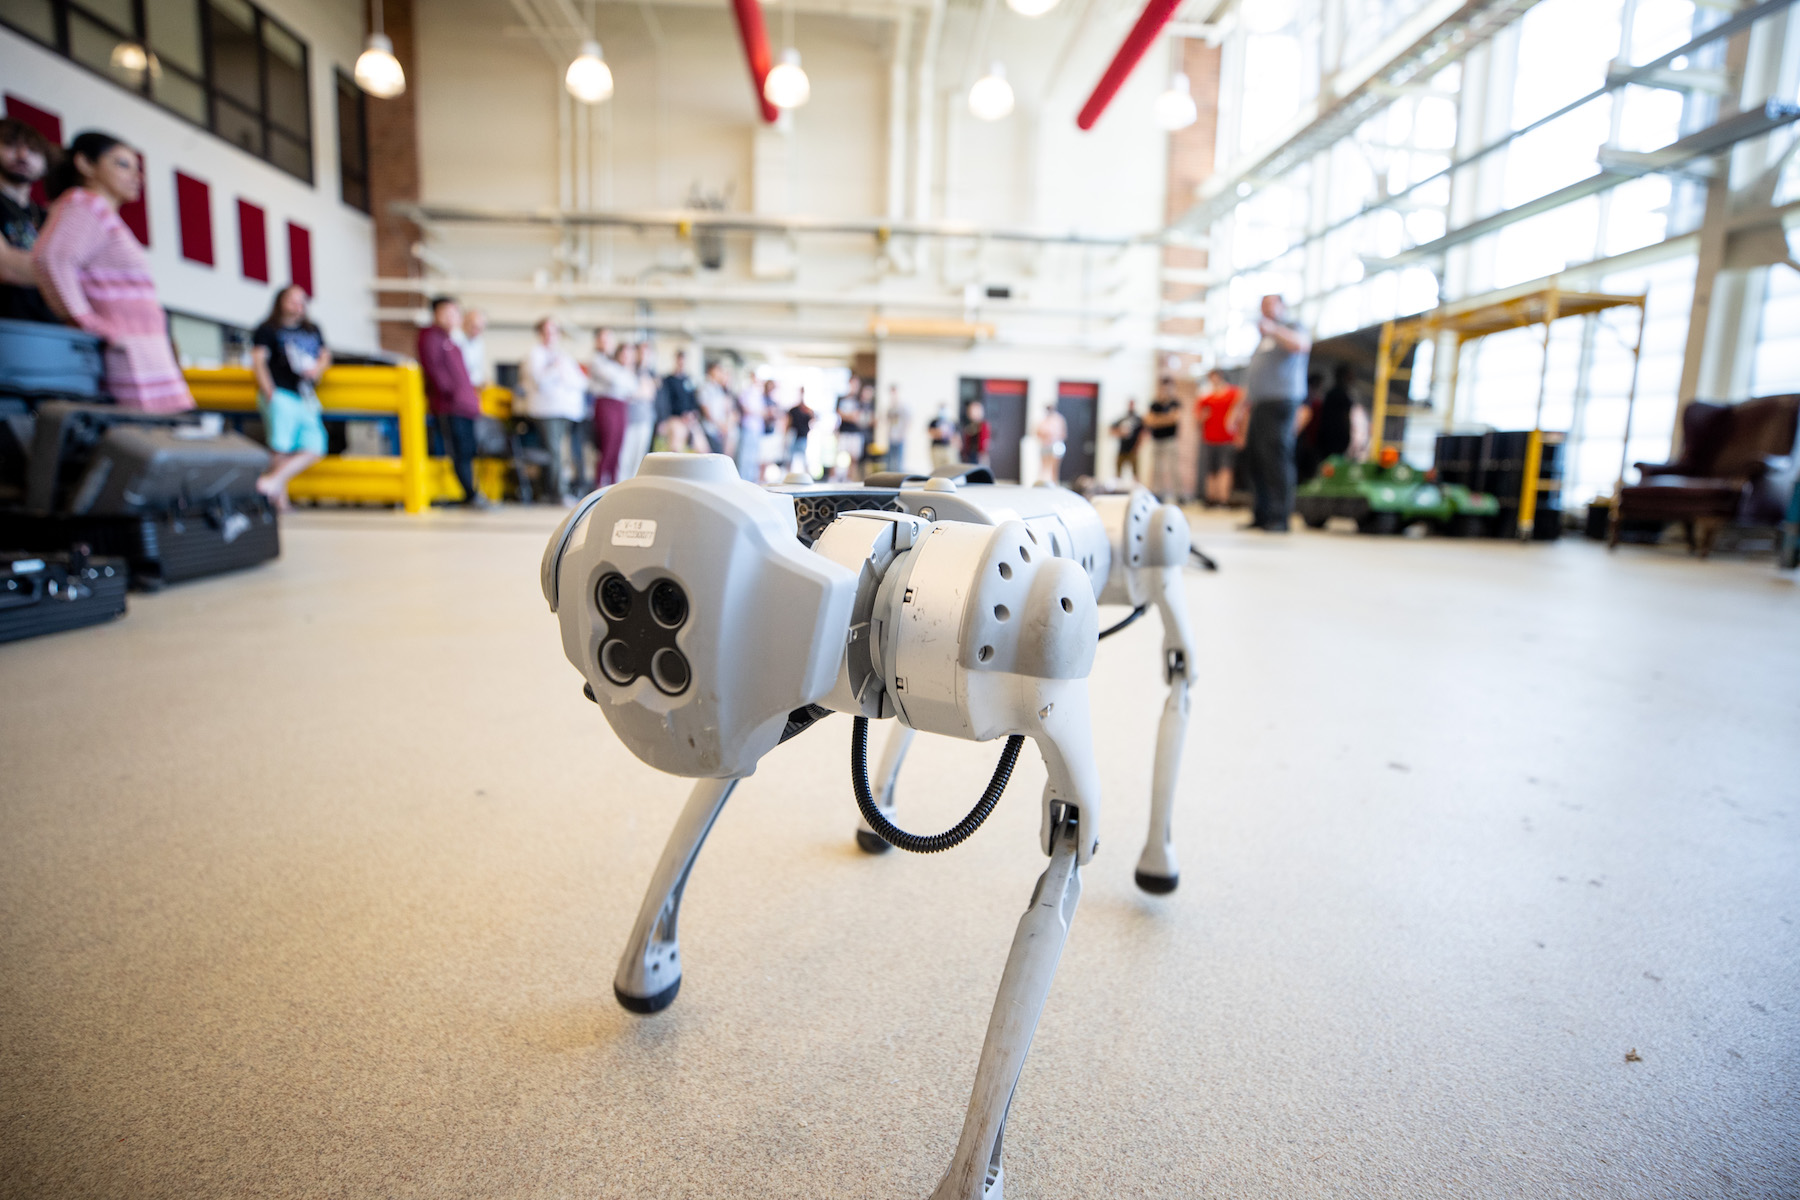 Robotic dogs walk, wag and climb for College of STEM students, professors